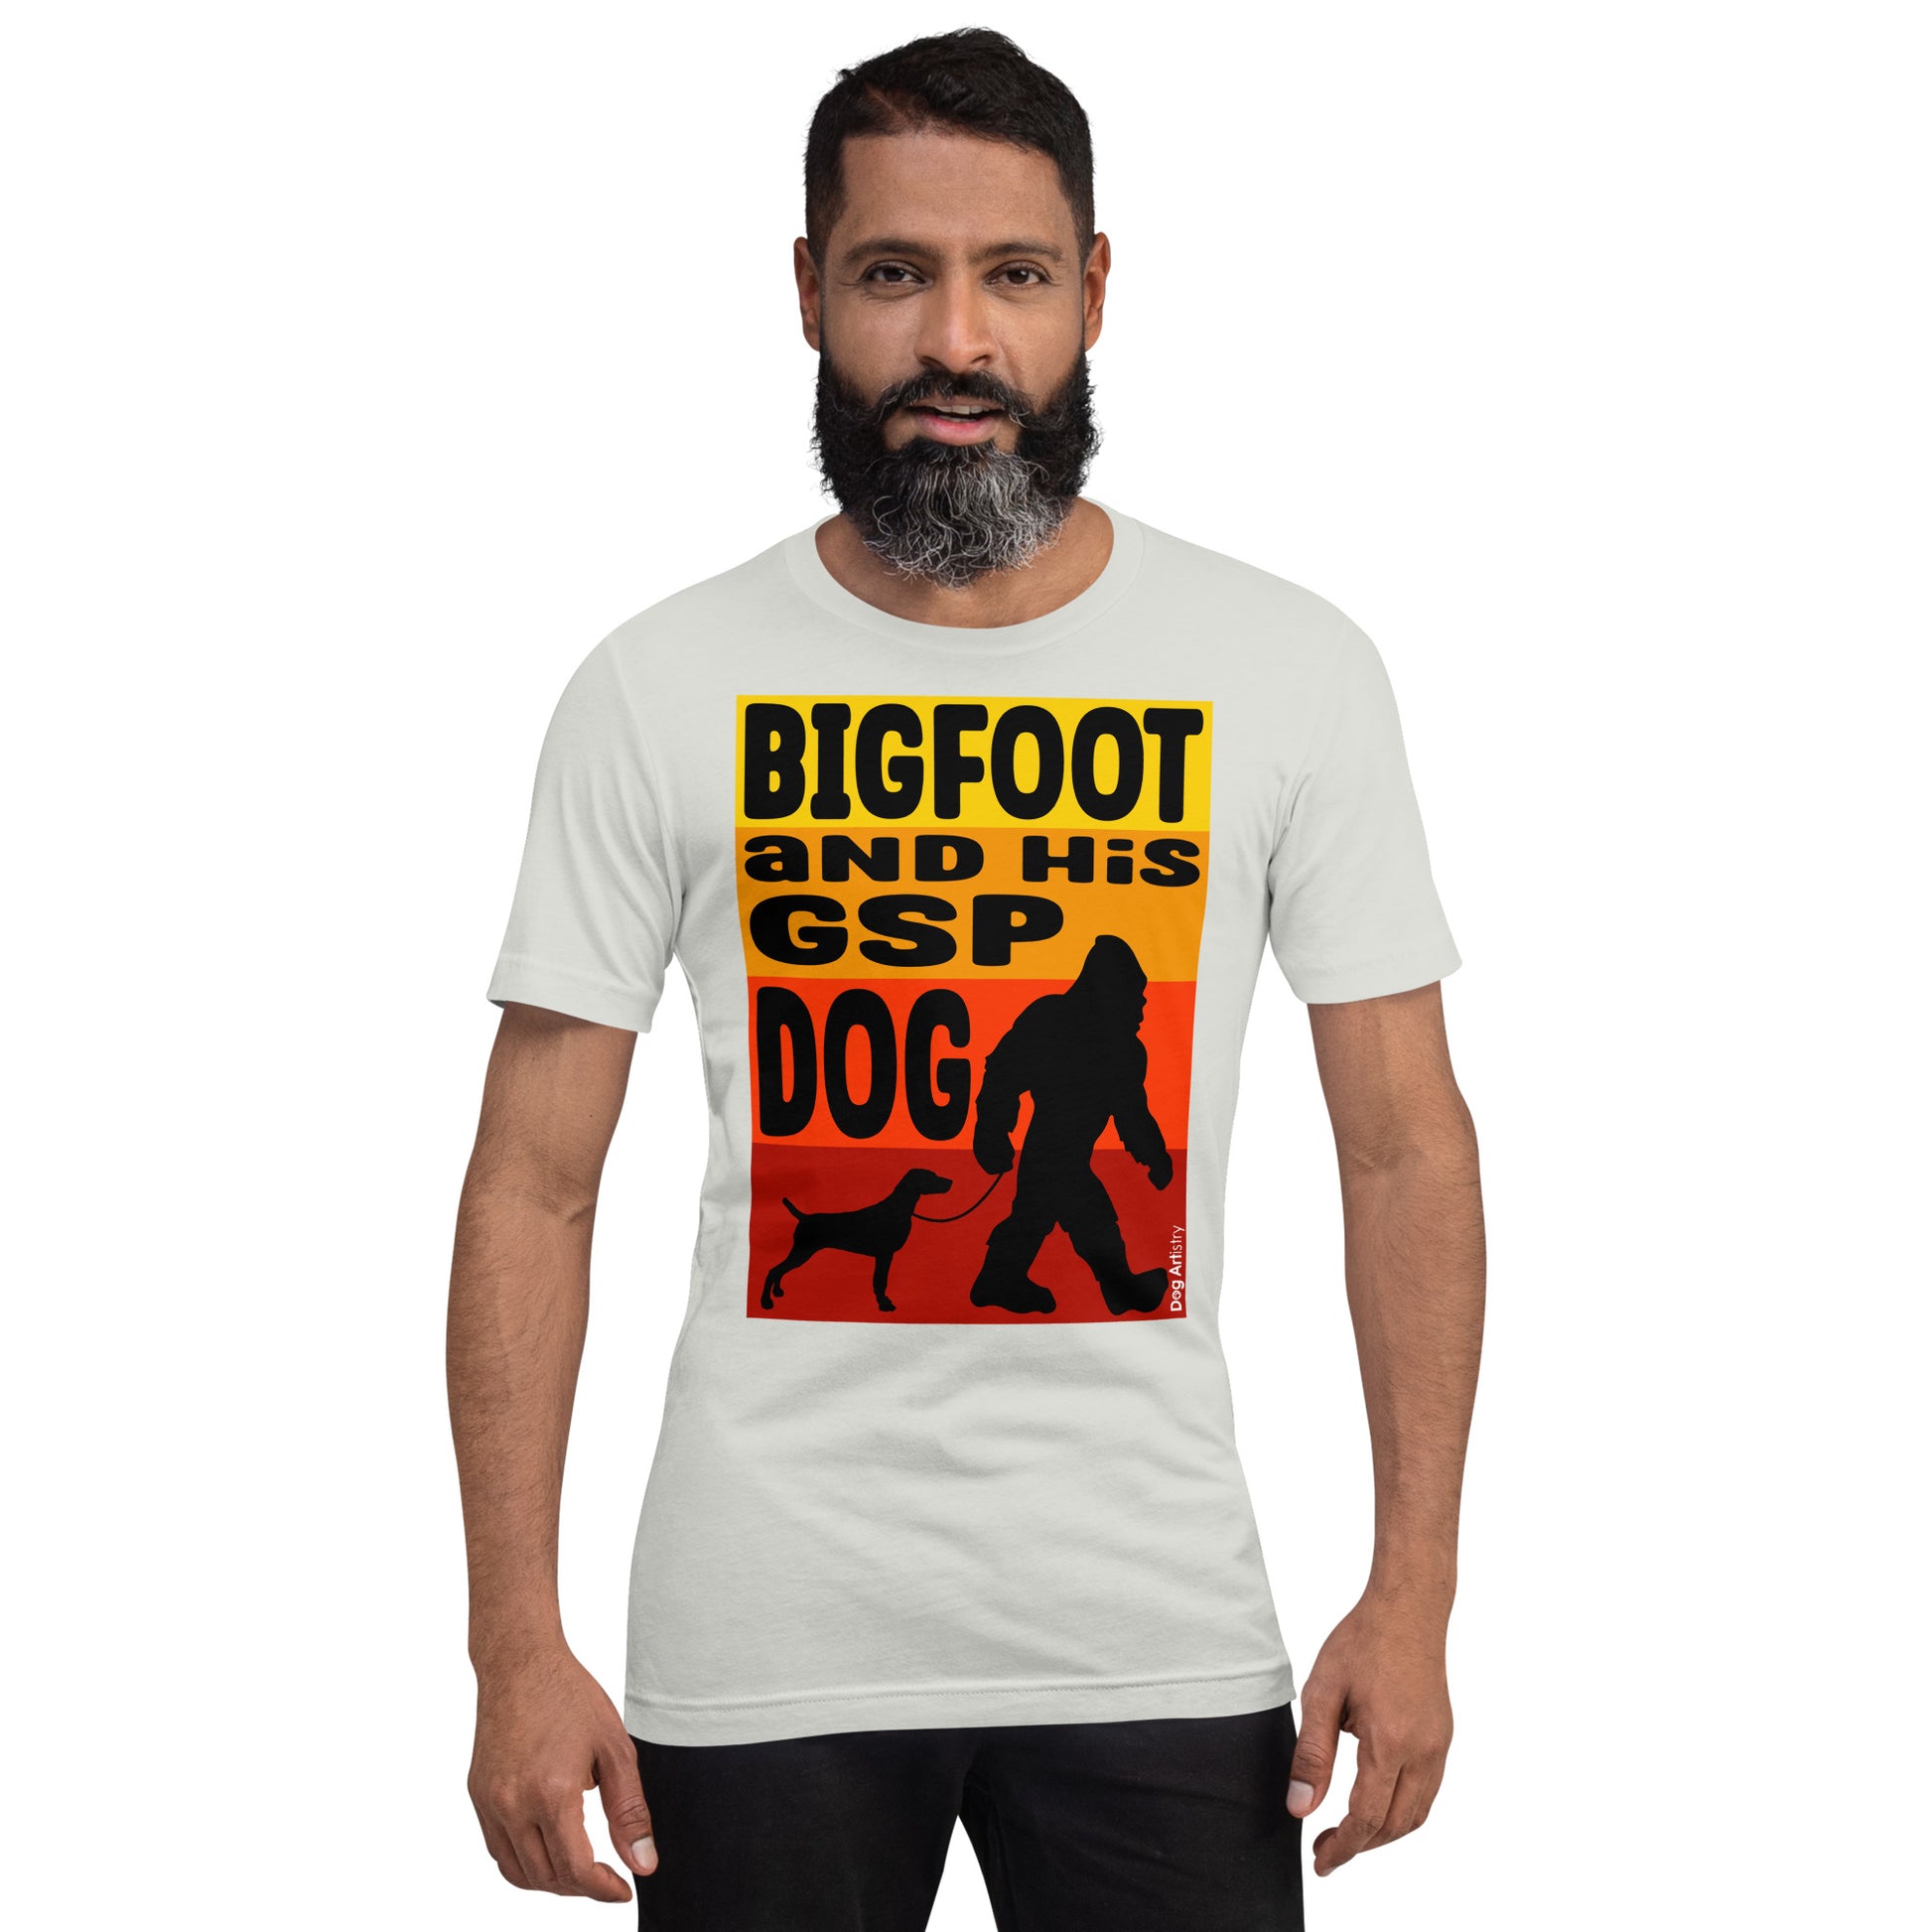 Bigfoot and his German Shorthaired Pointer unisex silver t-shirt by Dog Artistry.